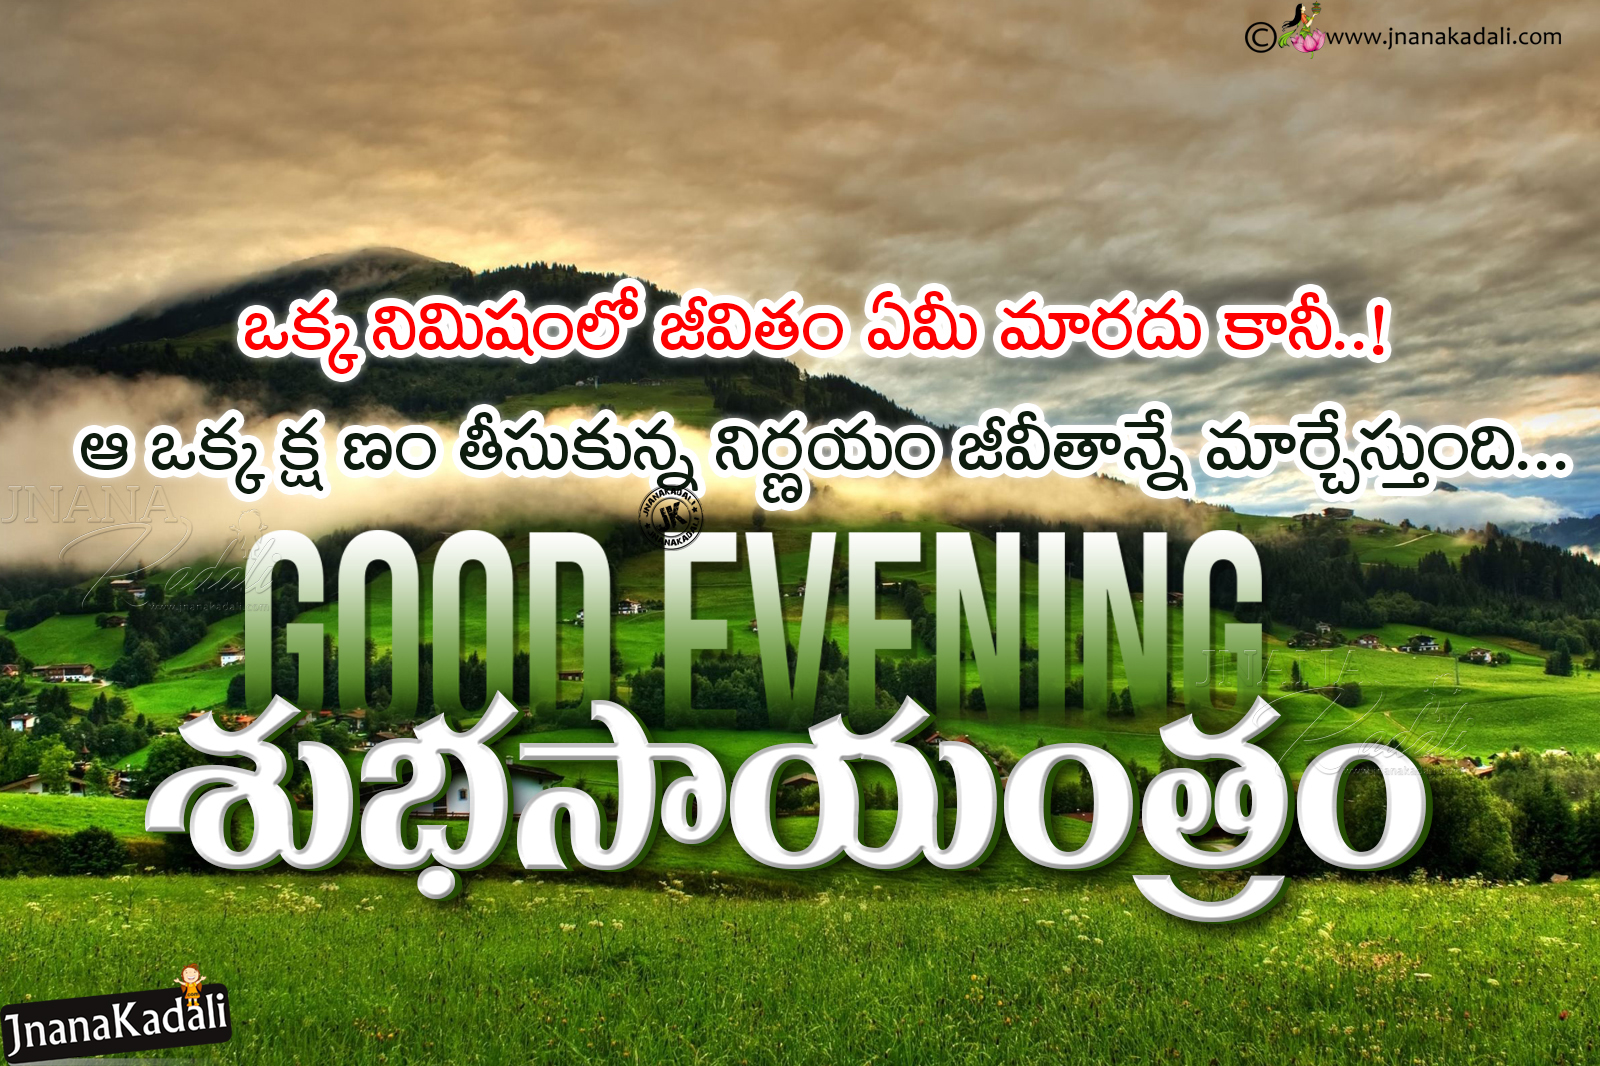 good evening telugu information greetings quotes hd wallpapers ...